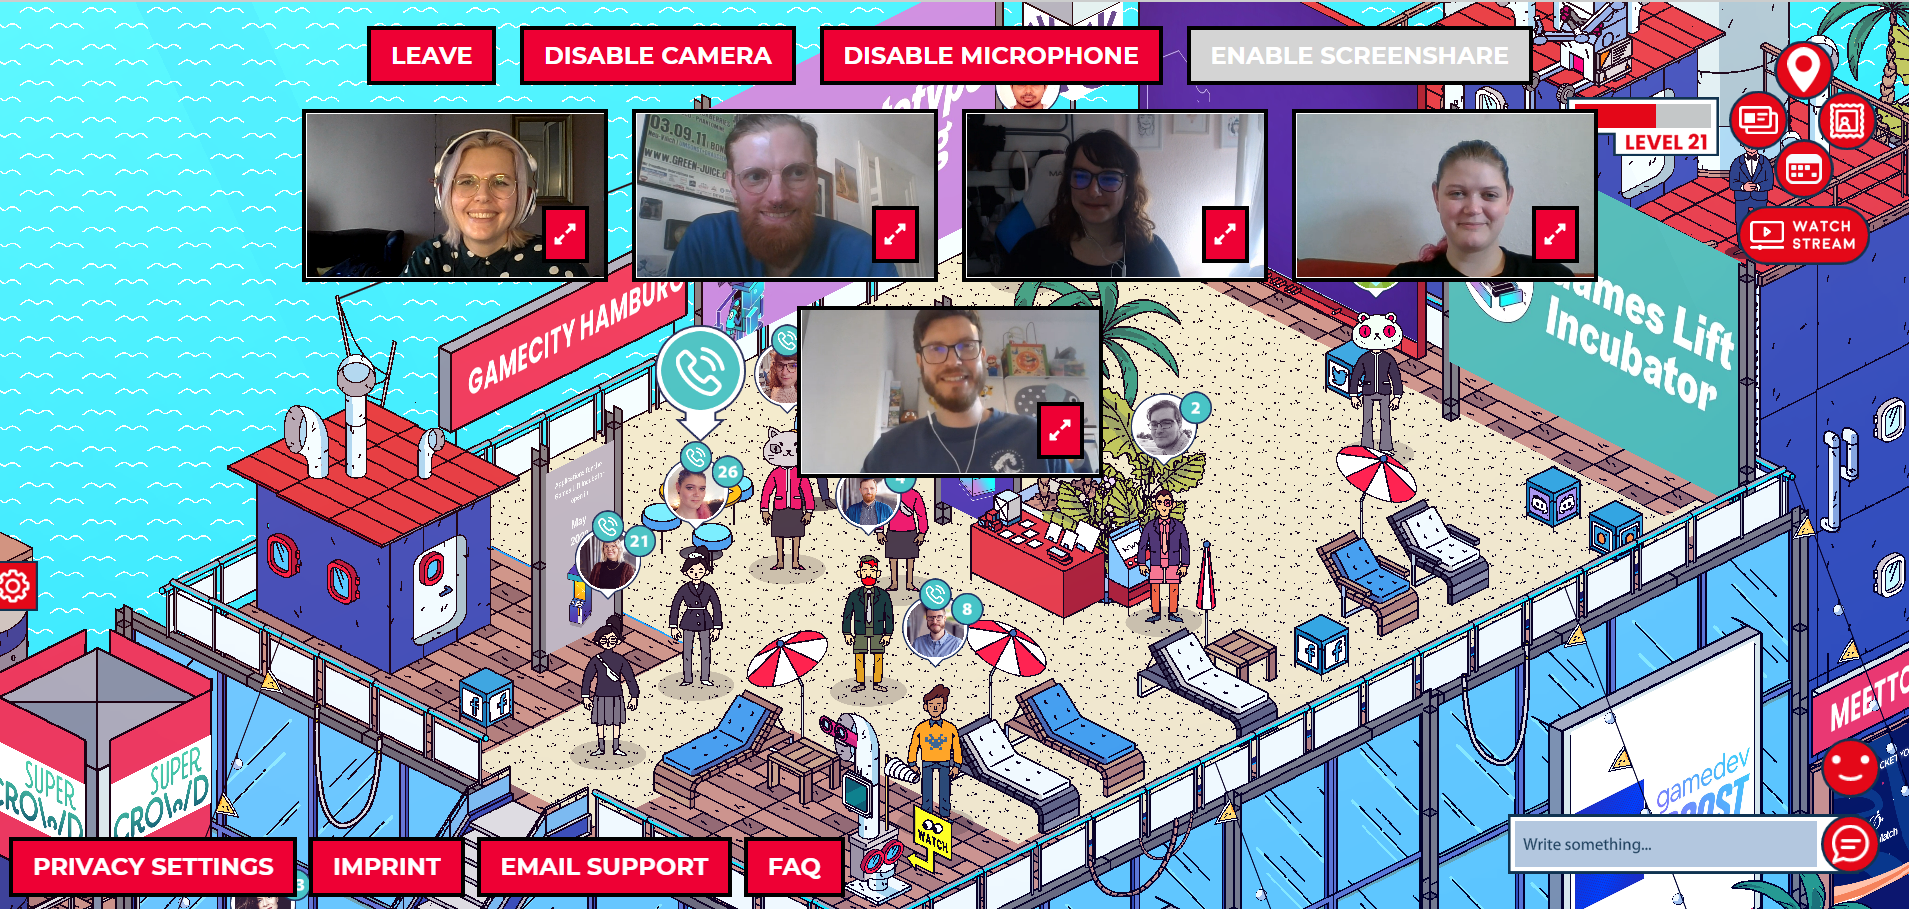 The Gamecity Hamburg team made good use of the video call feature